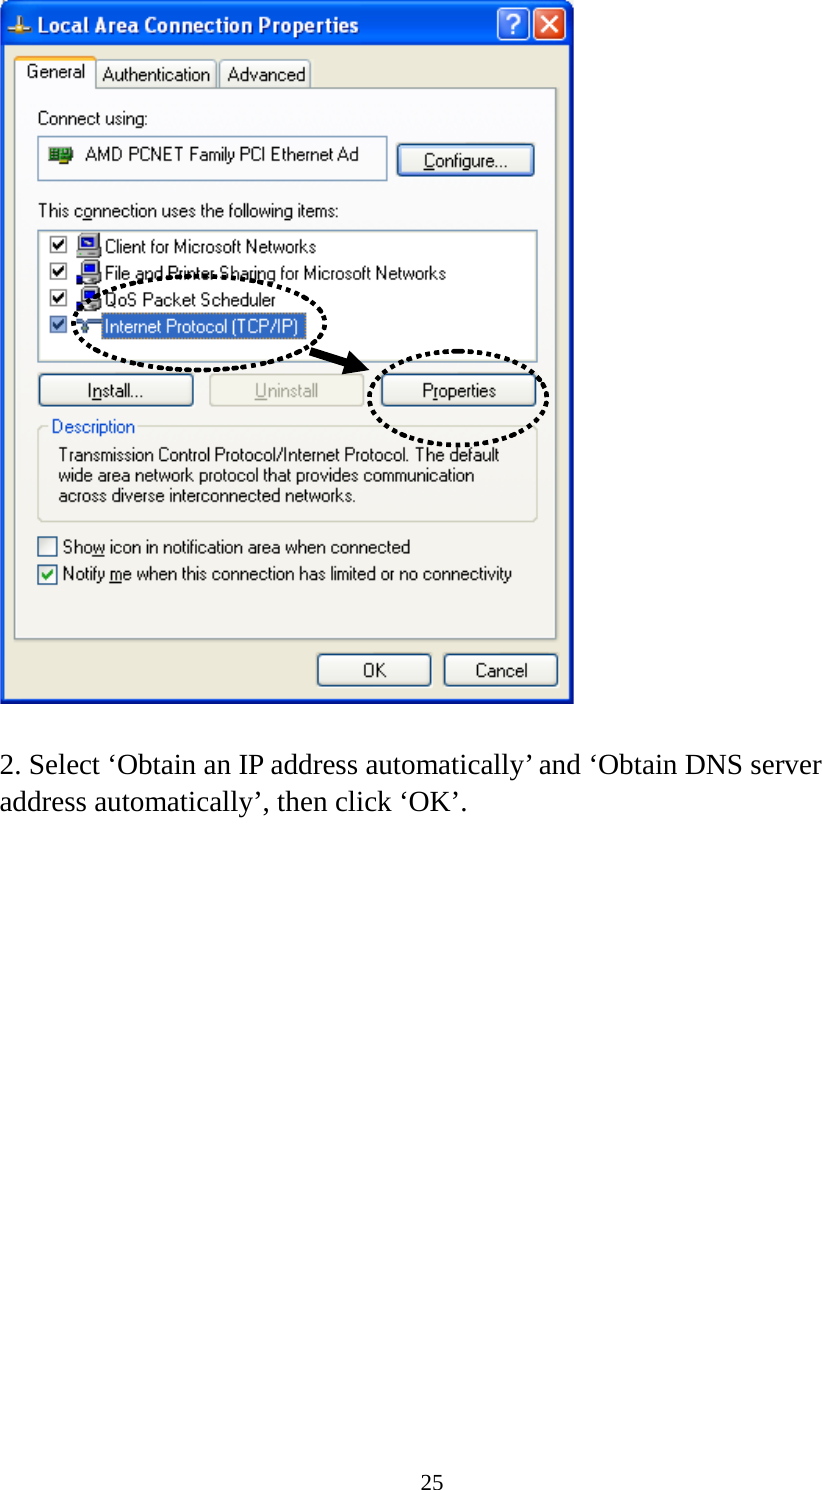 25   2. Select ‘Obtain an IP address automatically’ and ‘Obtain DNS server address automatically’, then click ‘OK’. 